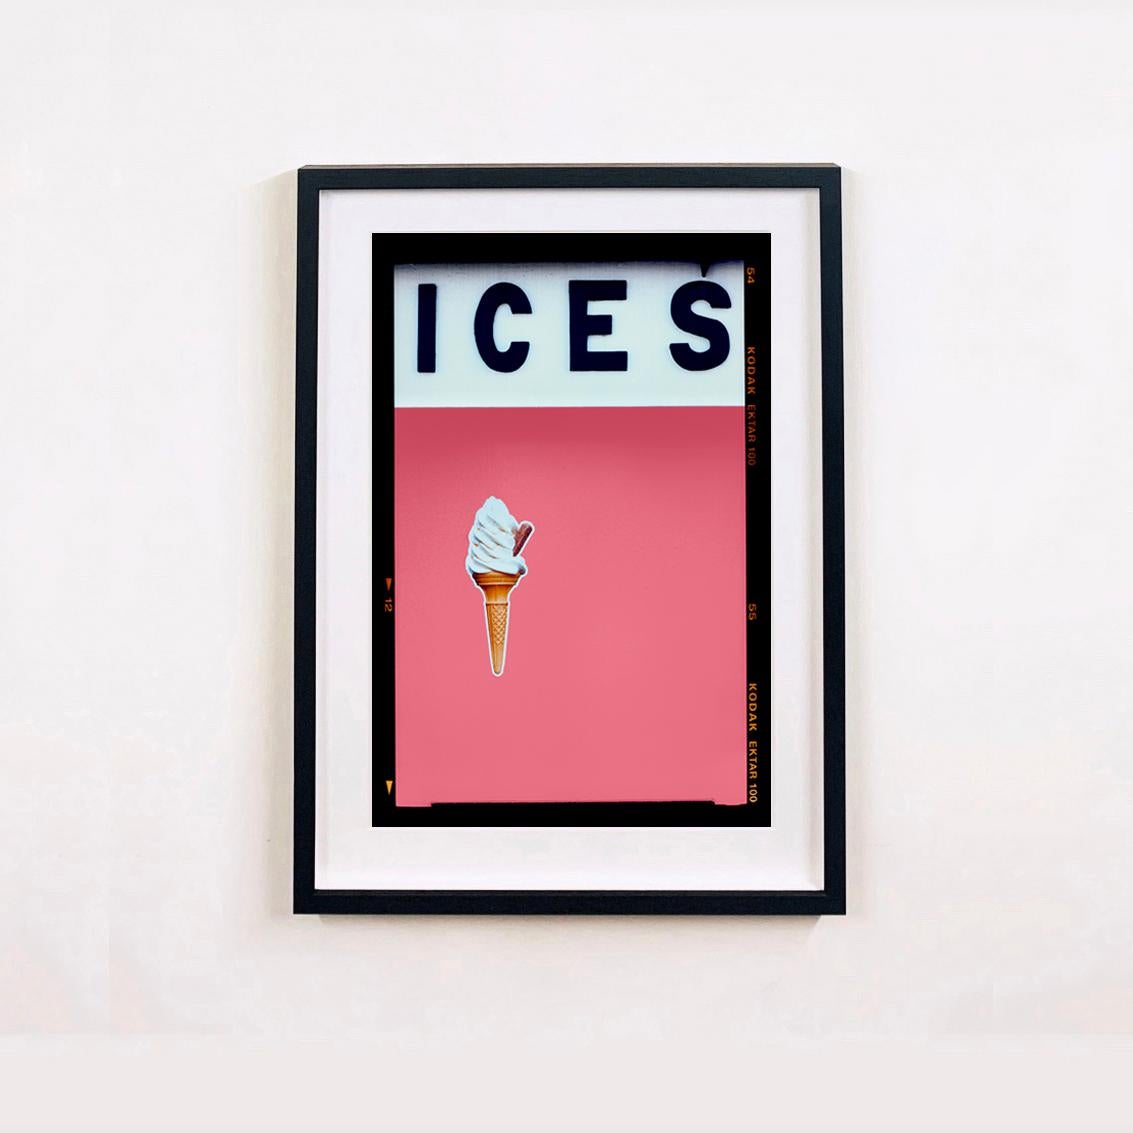 Ices (Coral), Bexhill-on-Sea - British seaside color photography - Photograph by Richard Heeps